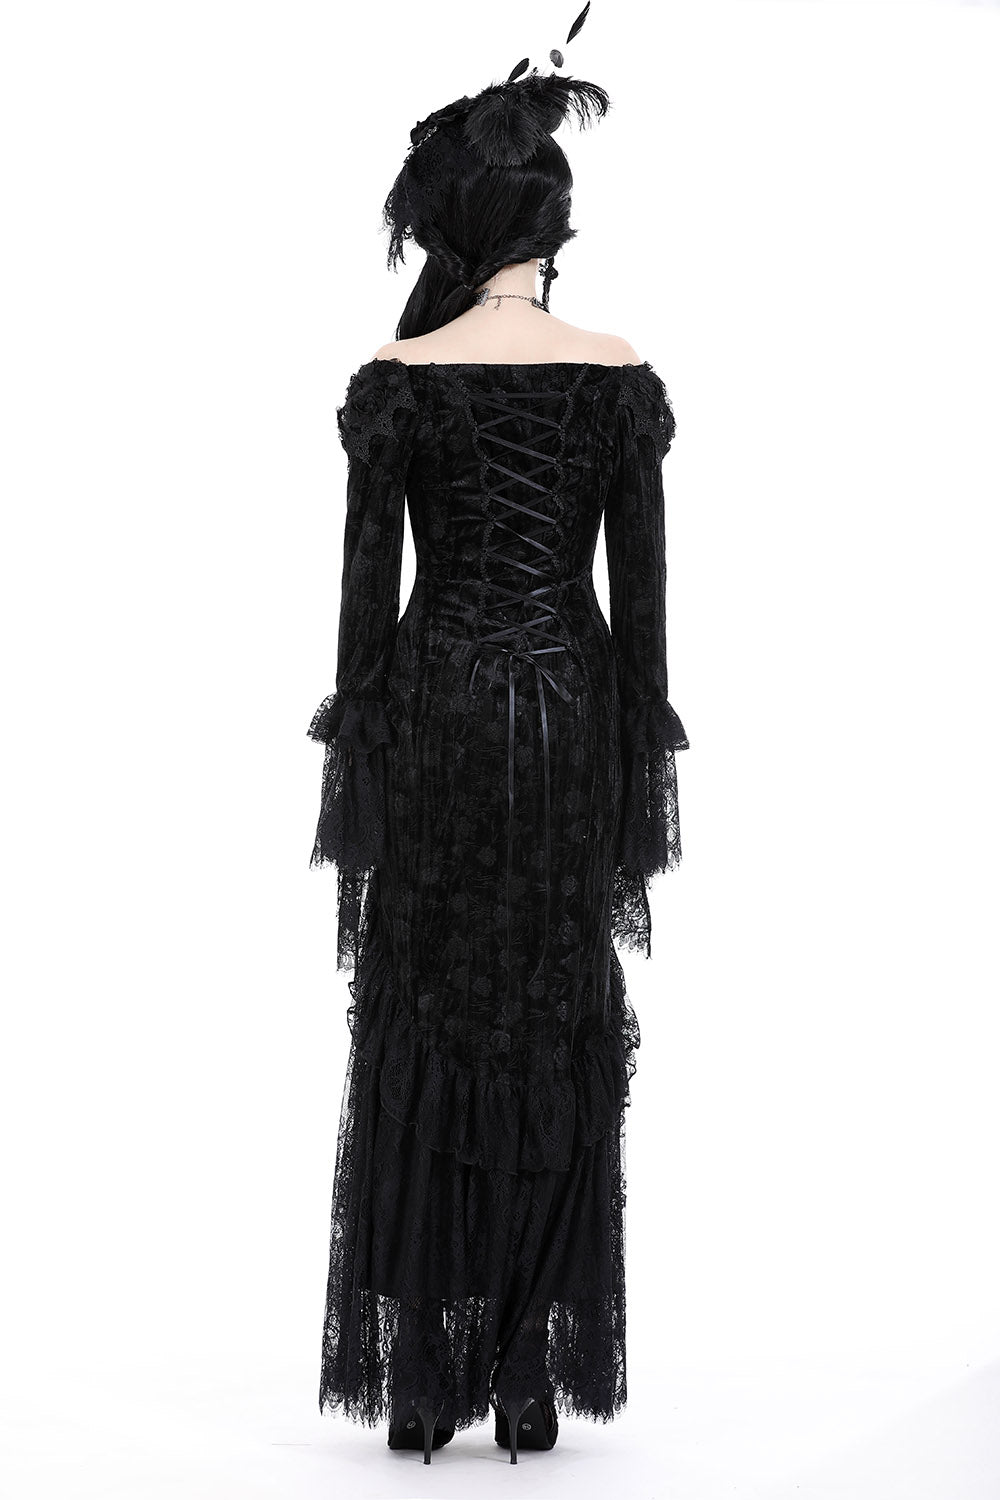 ruffled gothic gown